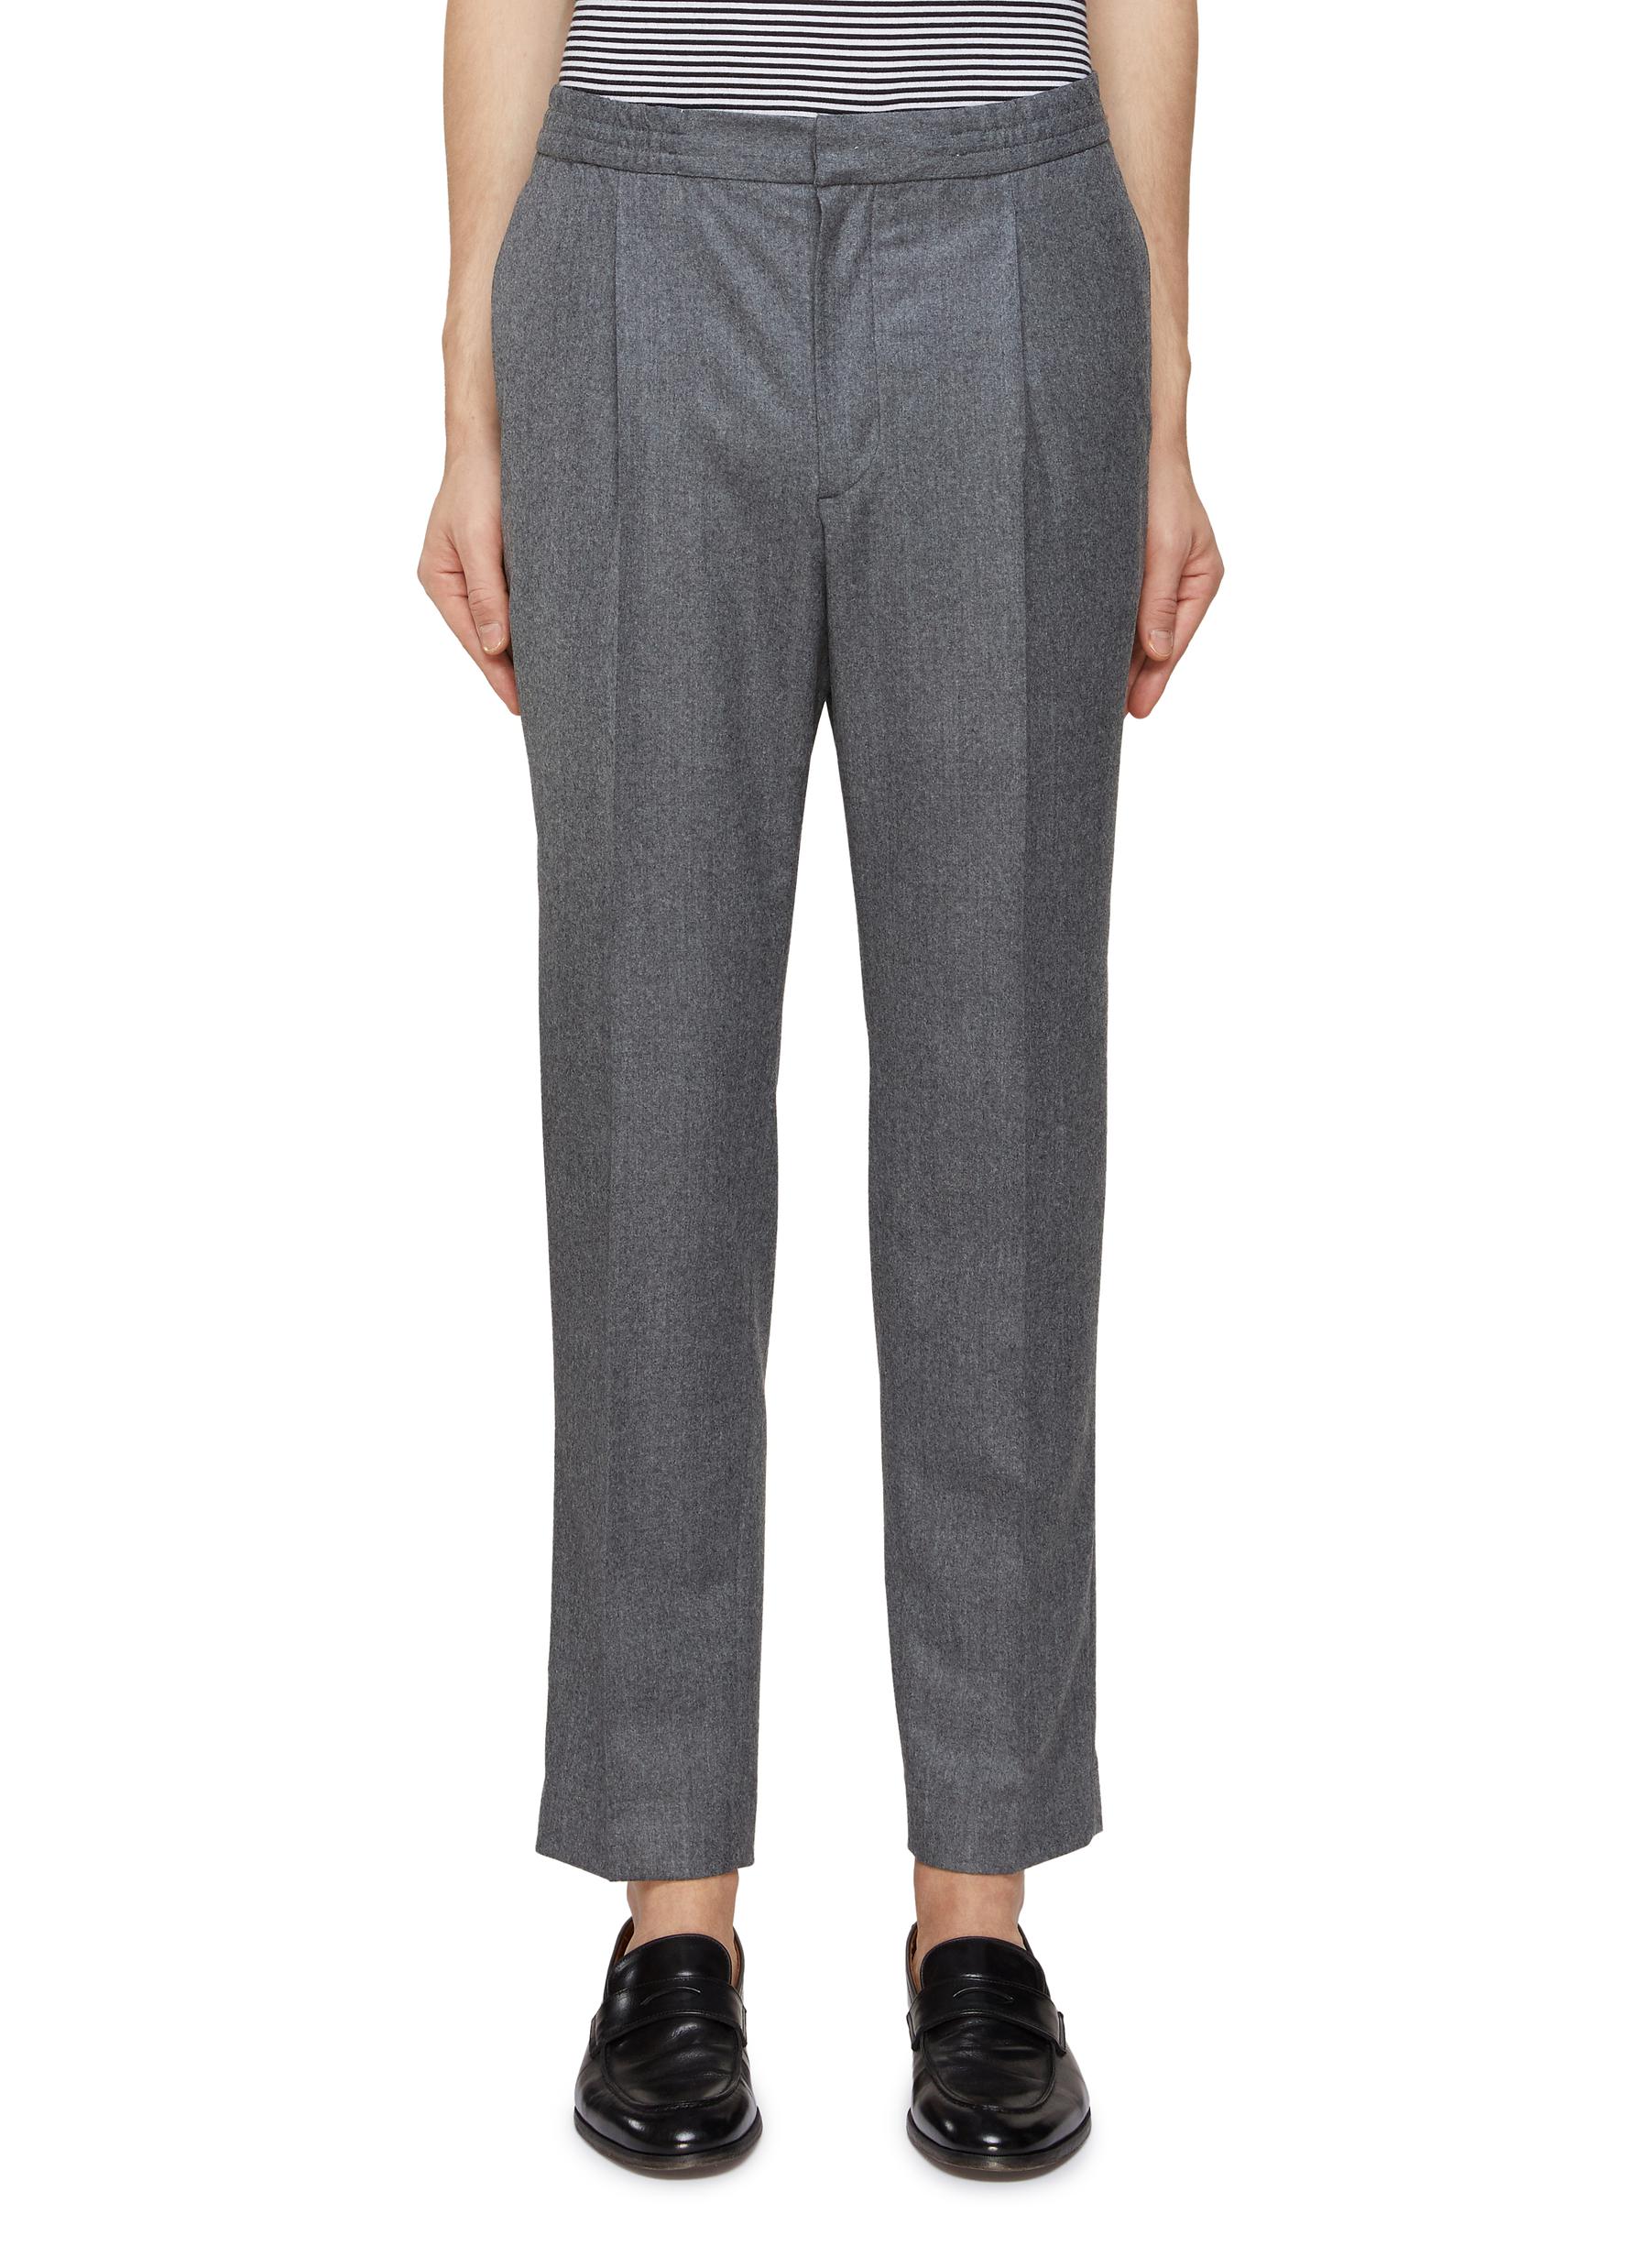 OFFICINE GÉNÉRALE 'DREW' MID RISE ELASTICATED WAISTBAND TAILORED WOOL PANTS